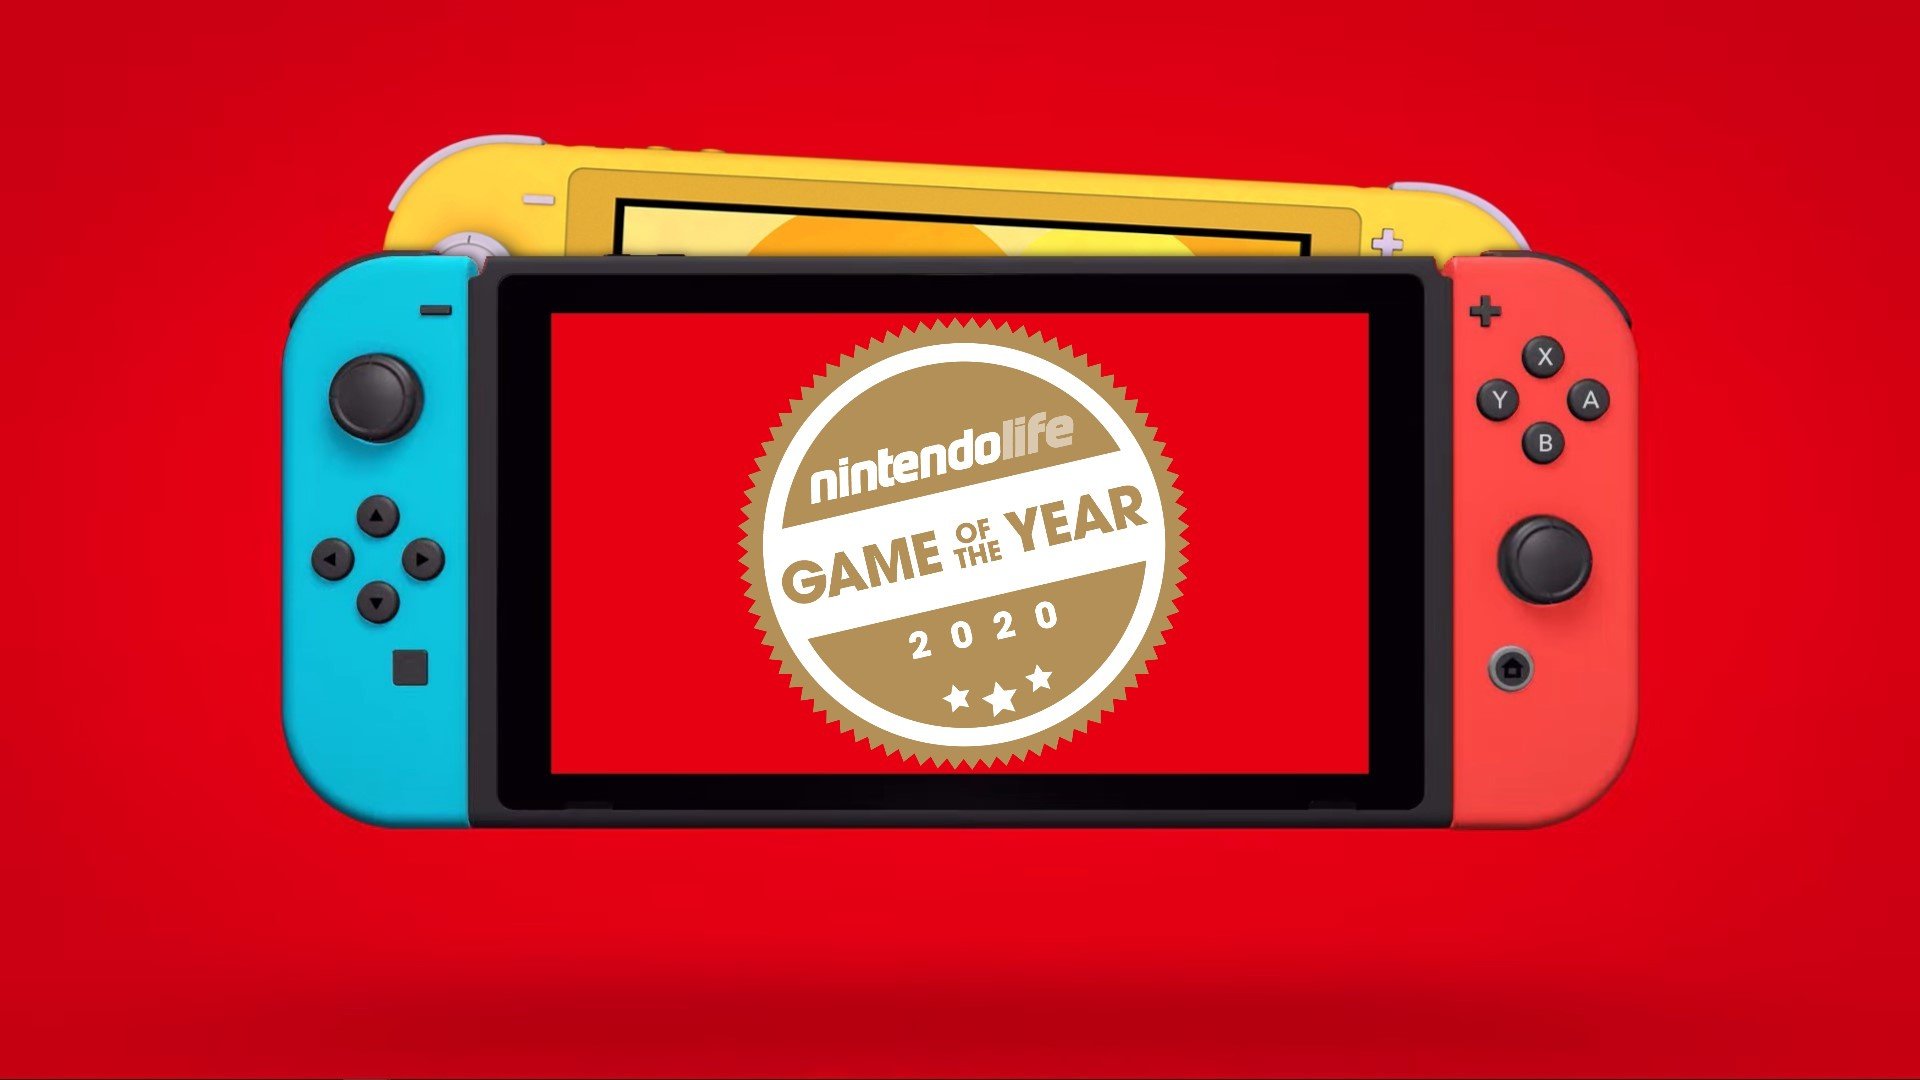 nintendo switch games ranked 2020